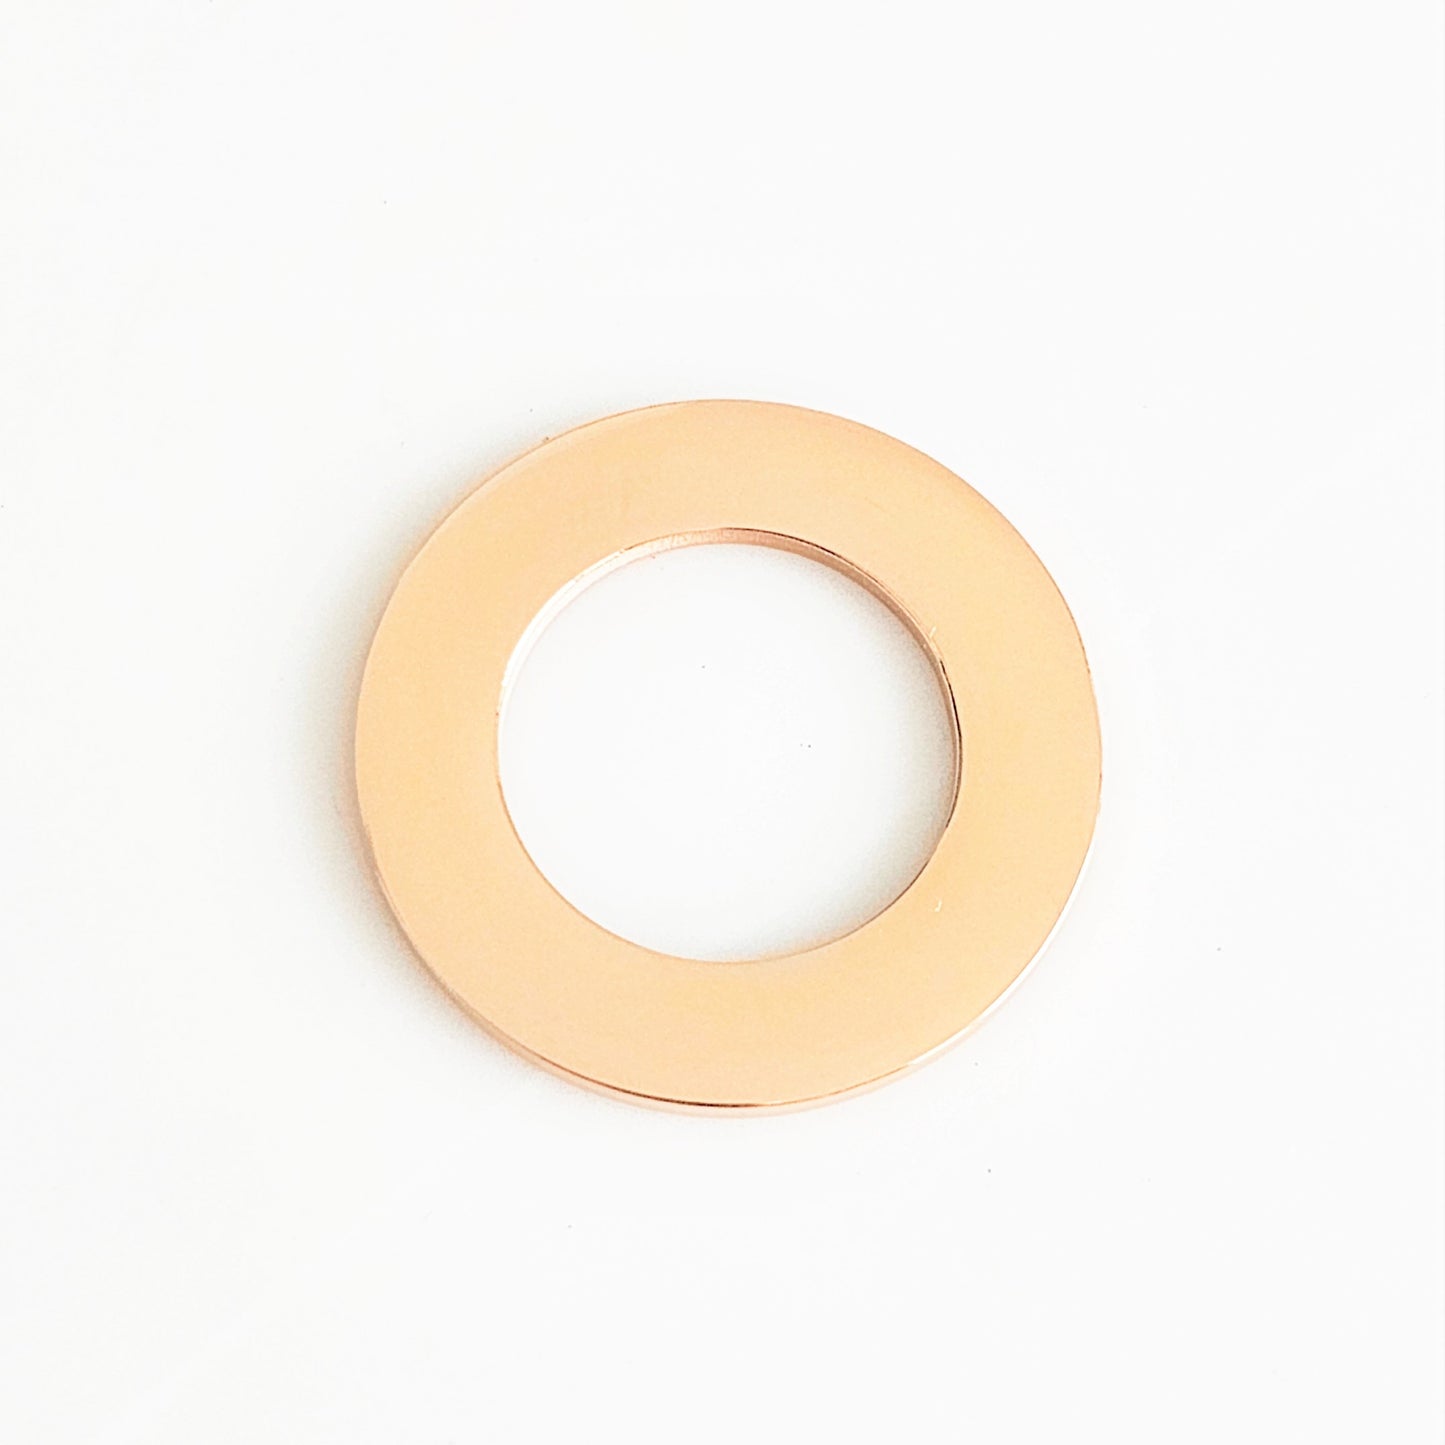 Rose Gold Plated Stainless Steel - 1" Washer (no hole)